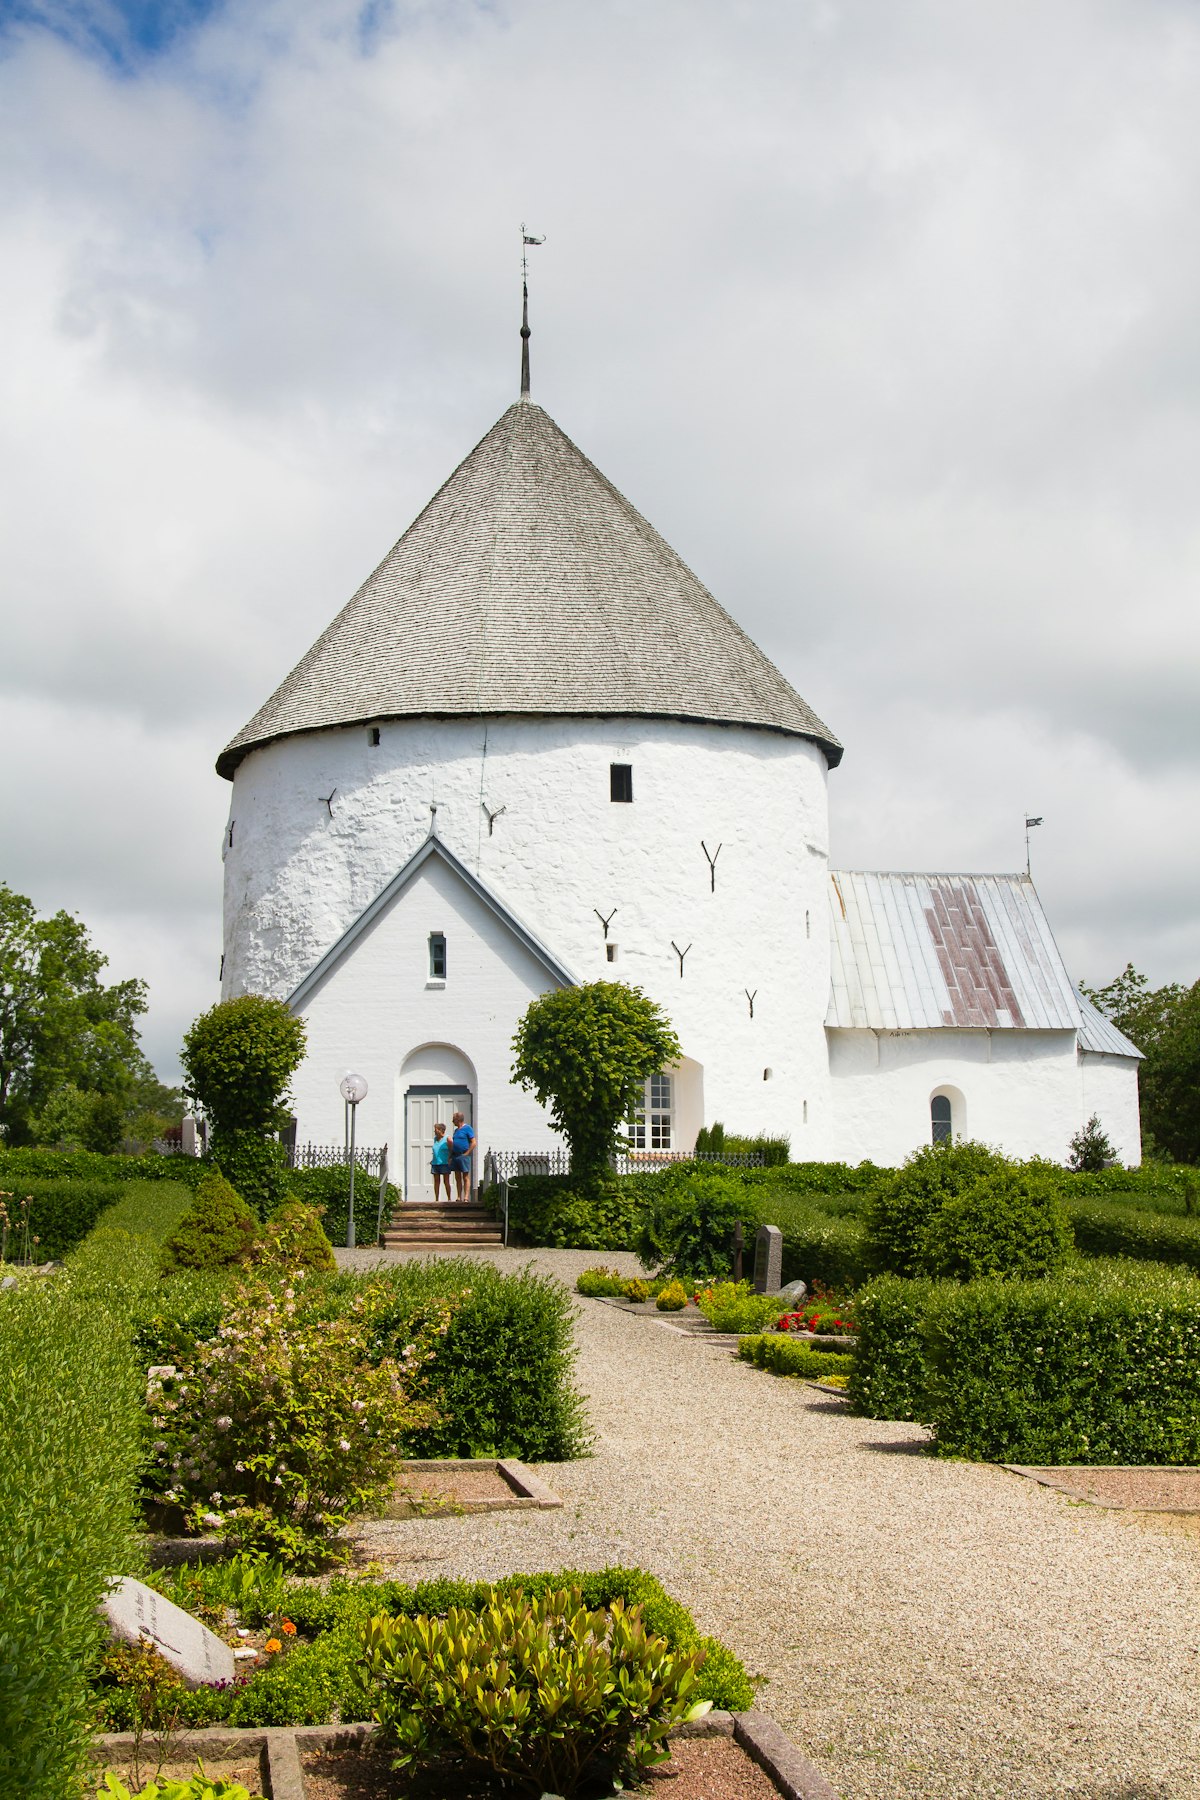 The church in Nylars, Bornholm island, Denmark, is the oldest "round church" on the island.